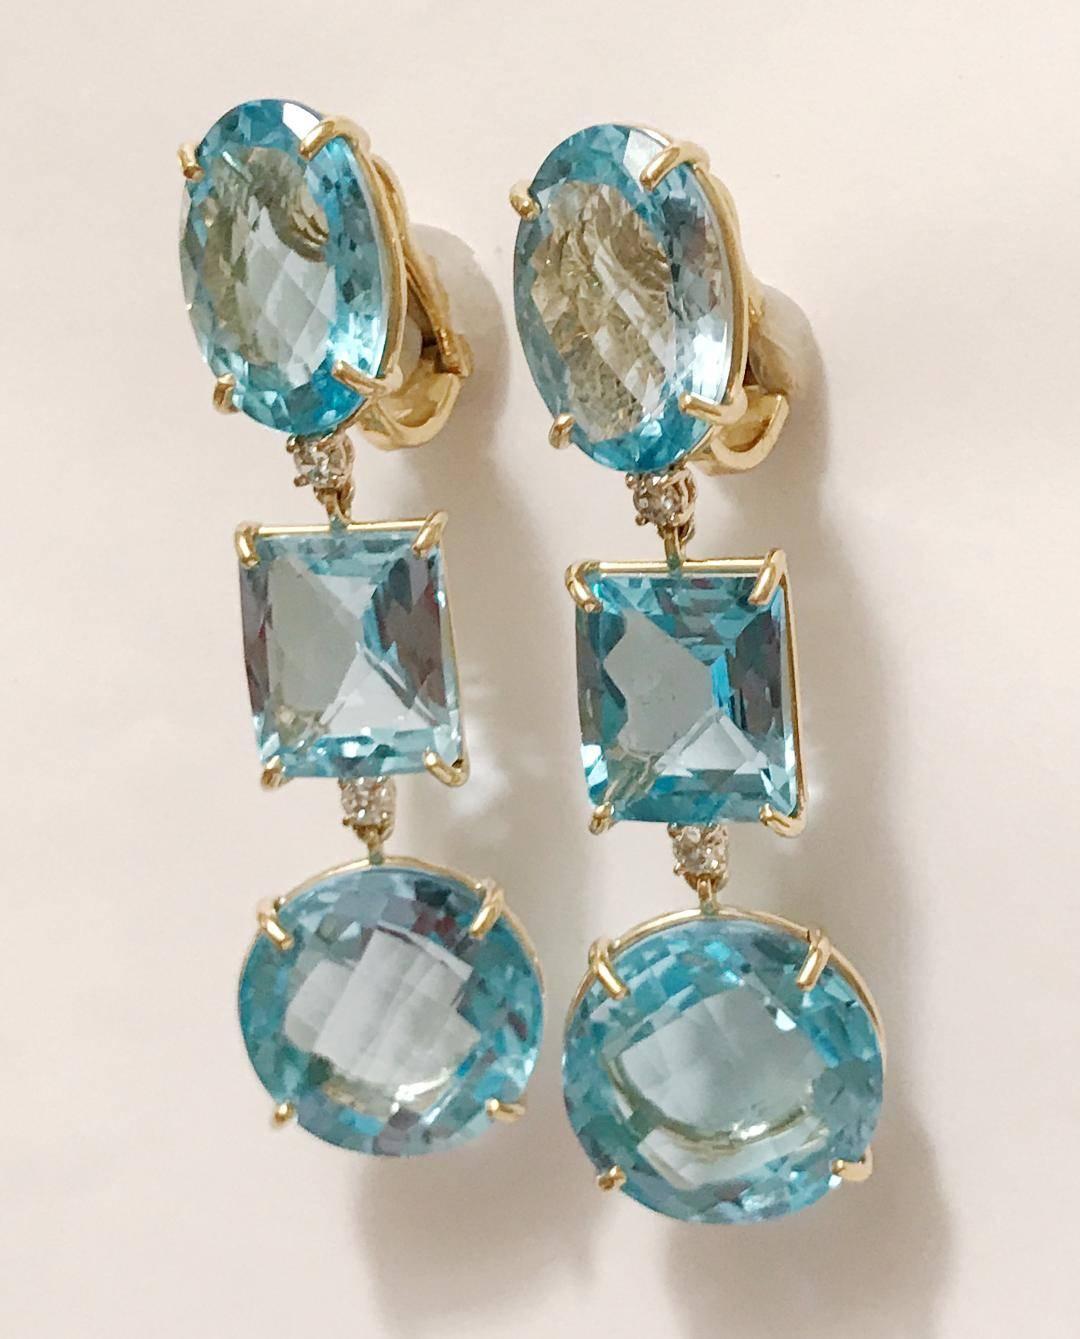 18kt Yellow Gold Three Drop Earring with Blue Topaz and Diamond

The top stone is oval, the middle stone is rectangle, and the bottom stone is circle. 

This earring can be posted or clip on or be mad in any stone combination. 

Please let me know